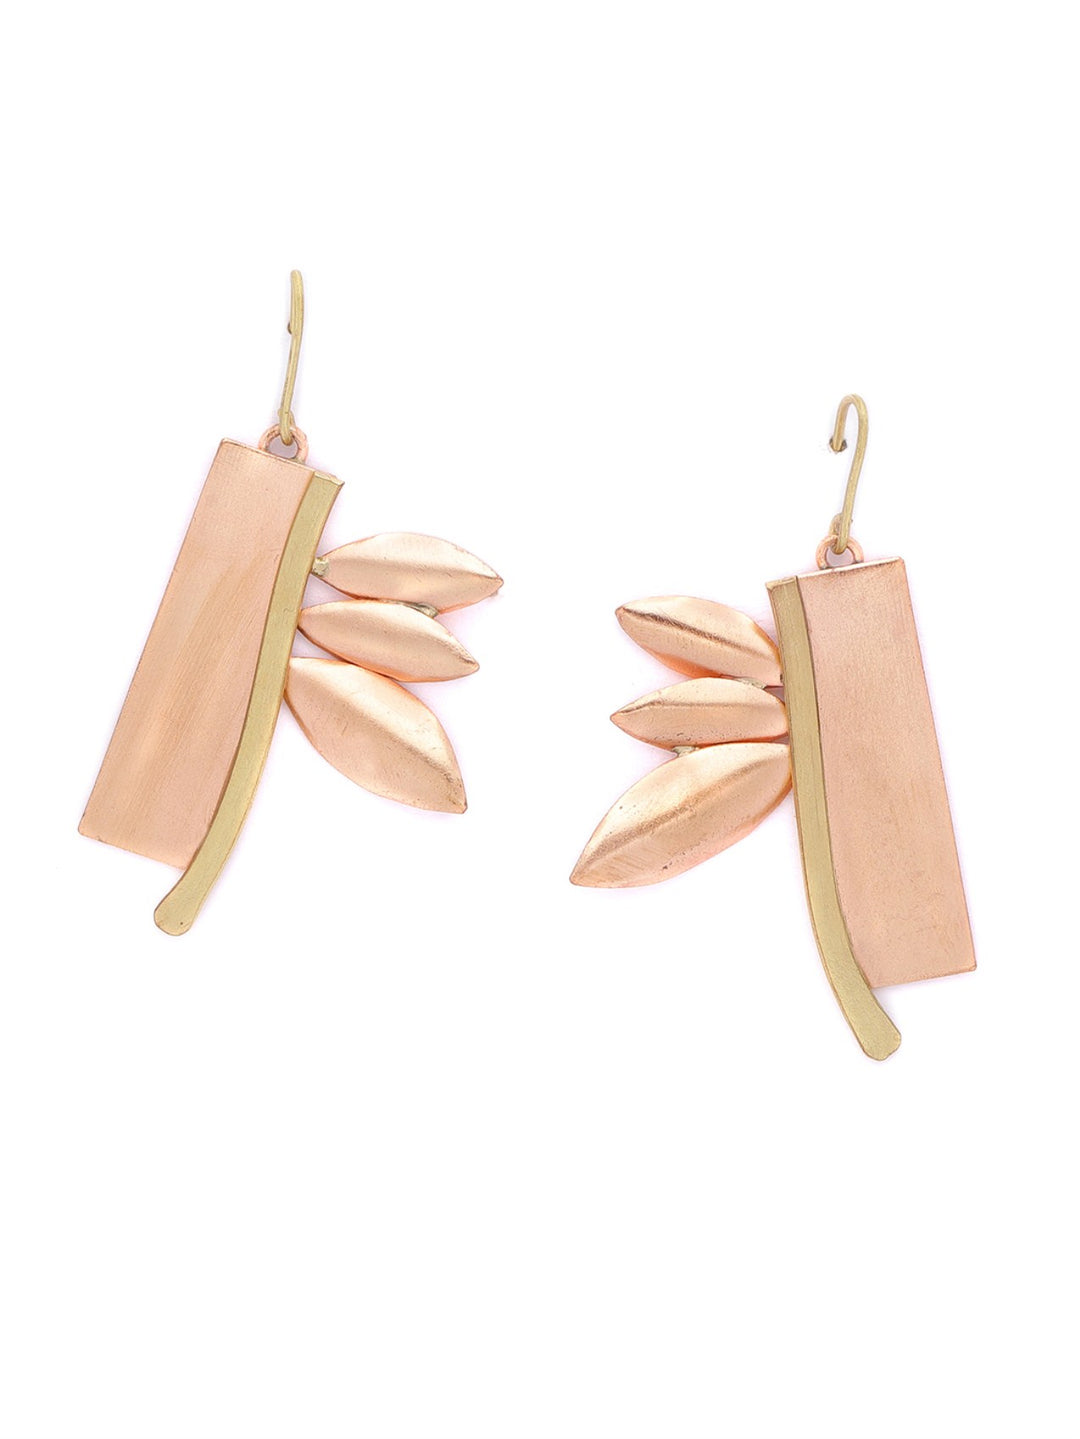 Stylish Gold And Rose Gold Leaf Shaped Drop Earring With Hook For Women And Girls